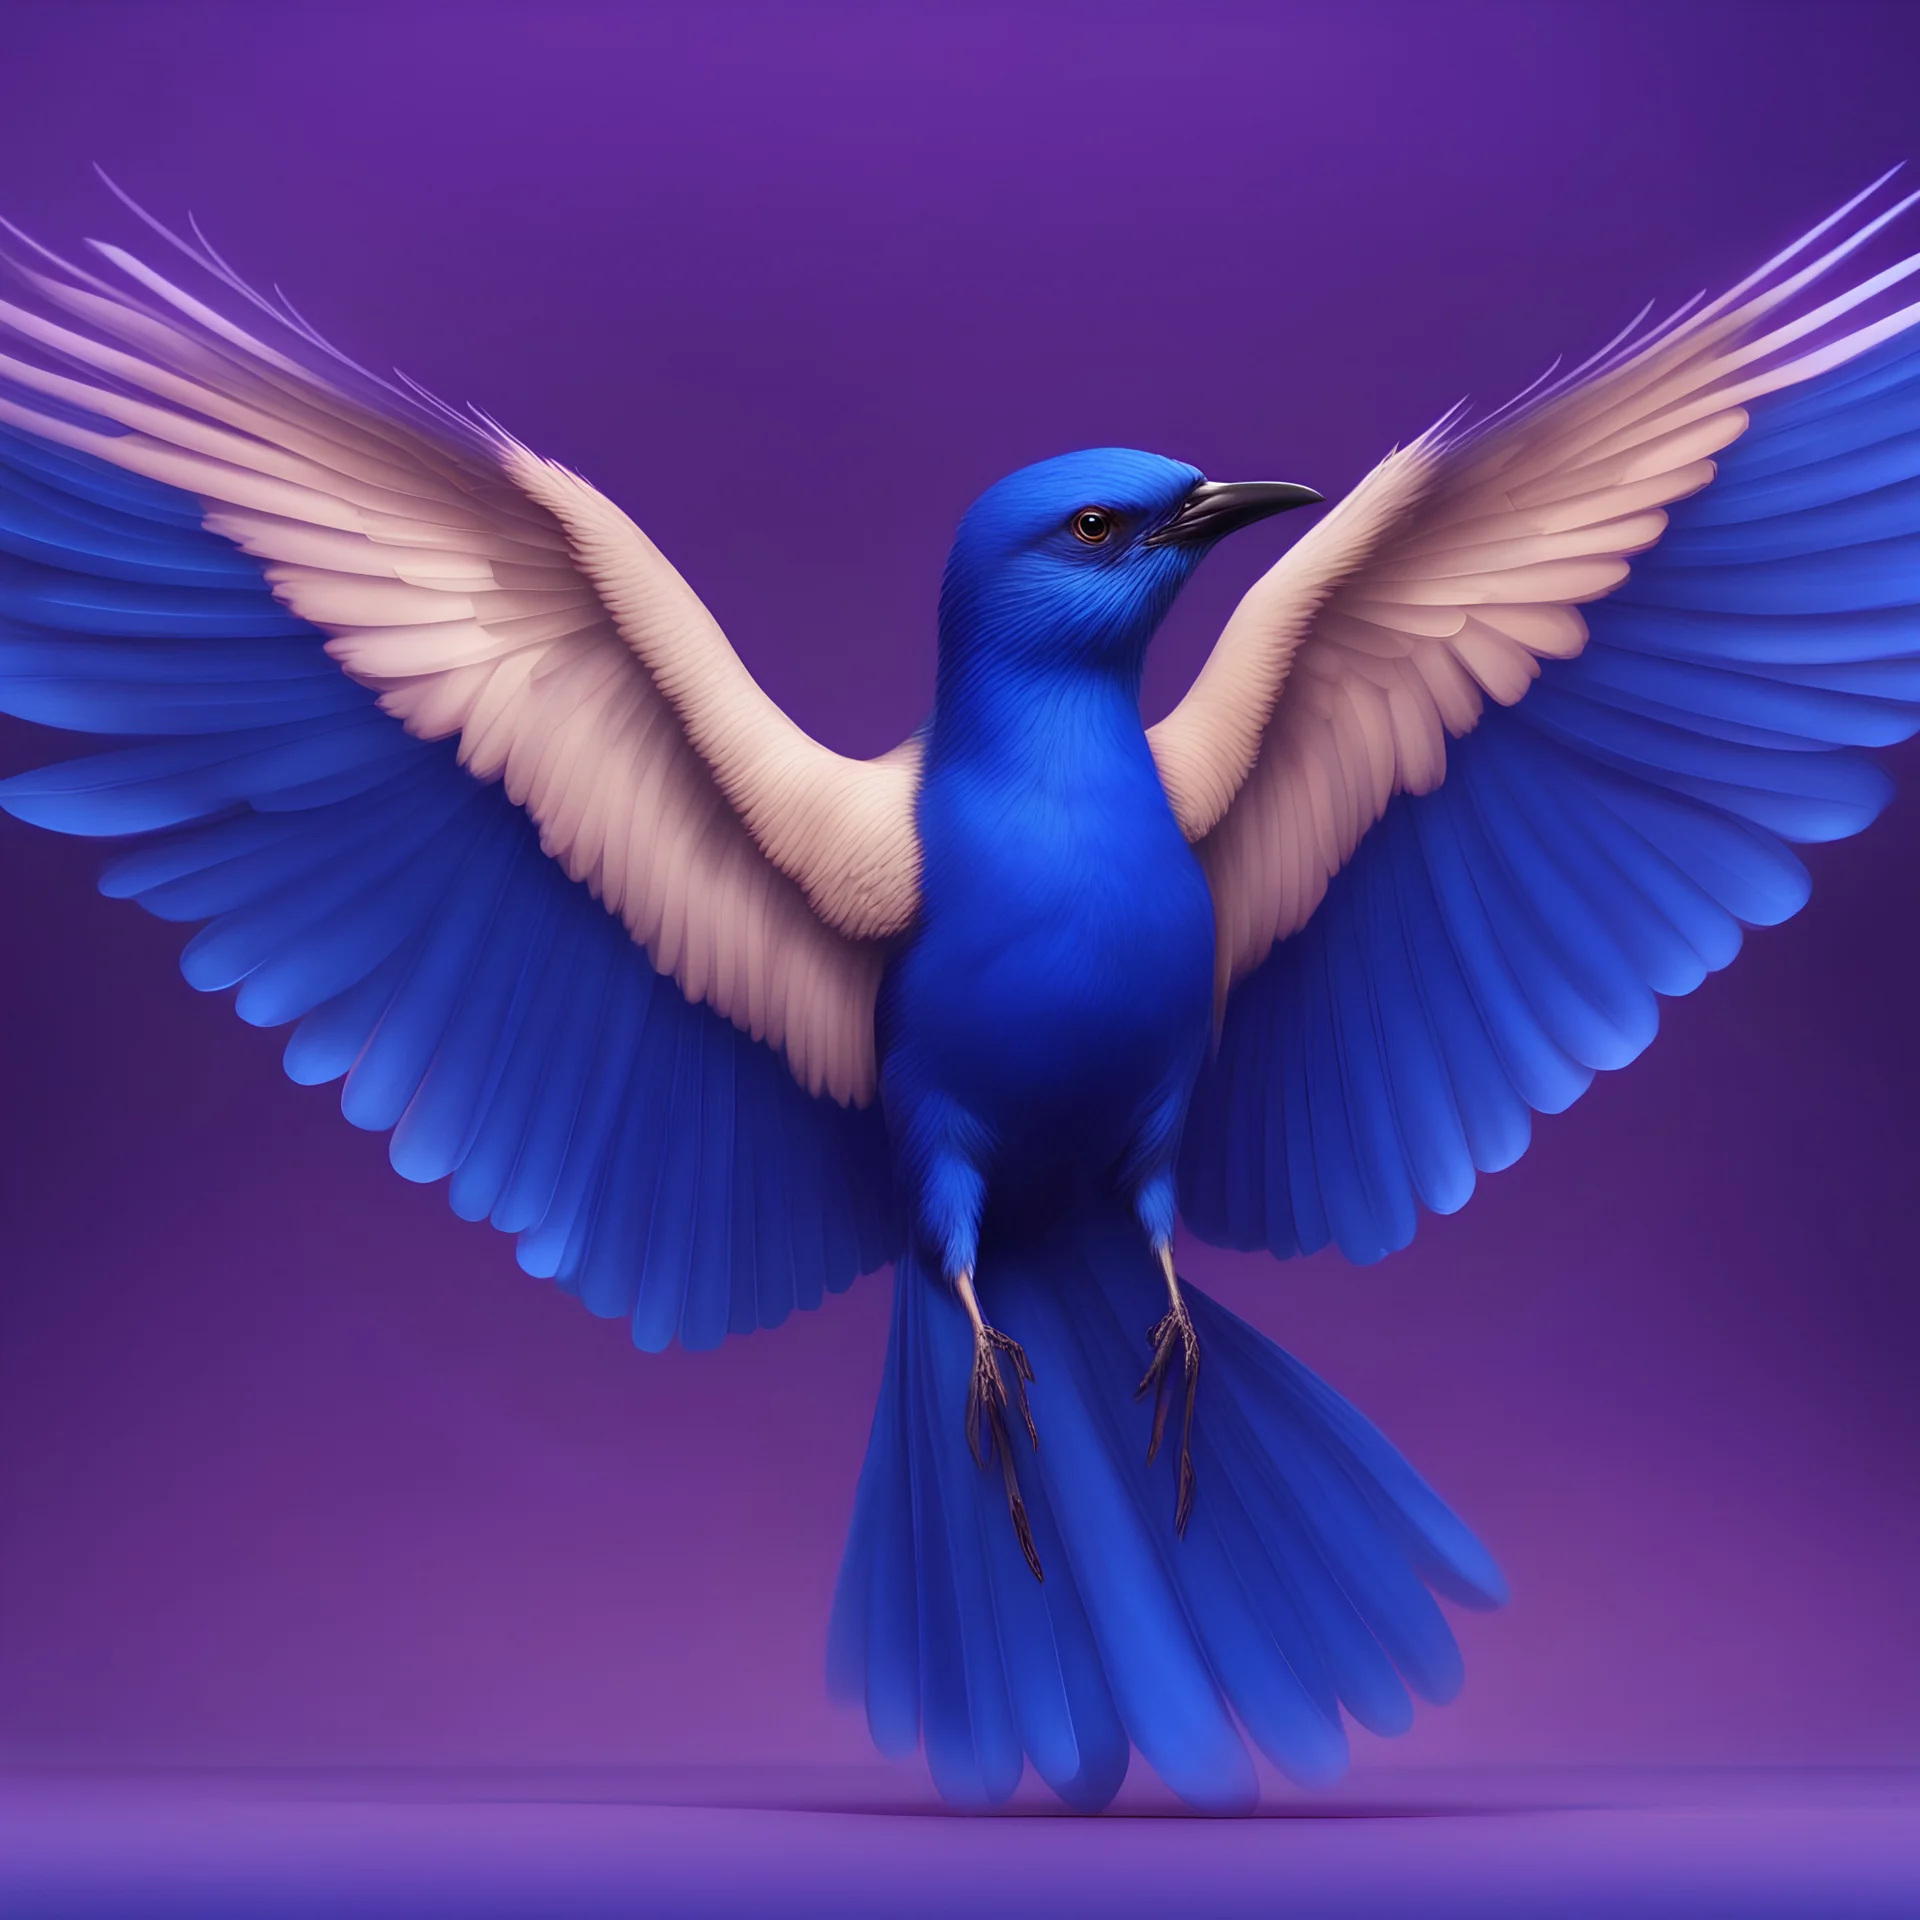 An illustration of a royal blue bird flying, spread wings, wing is the only distinguishable shape, full body, soft and smooth glowing wings, soft feathers, macro lens, sharp focus, meticulously detailed, soft studio lighting, smooth blurred gradient evening purple background,